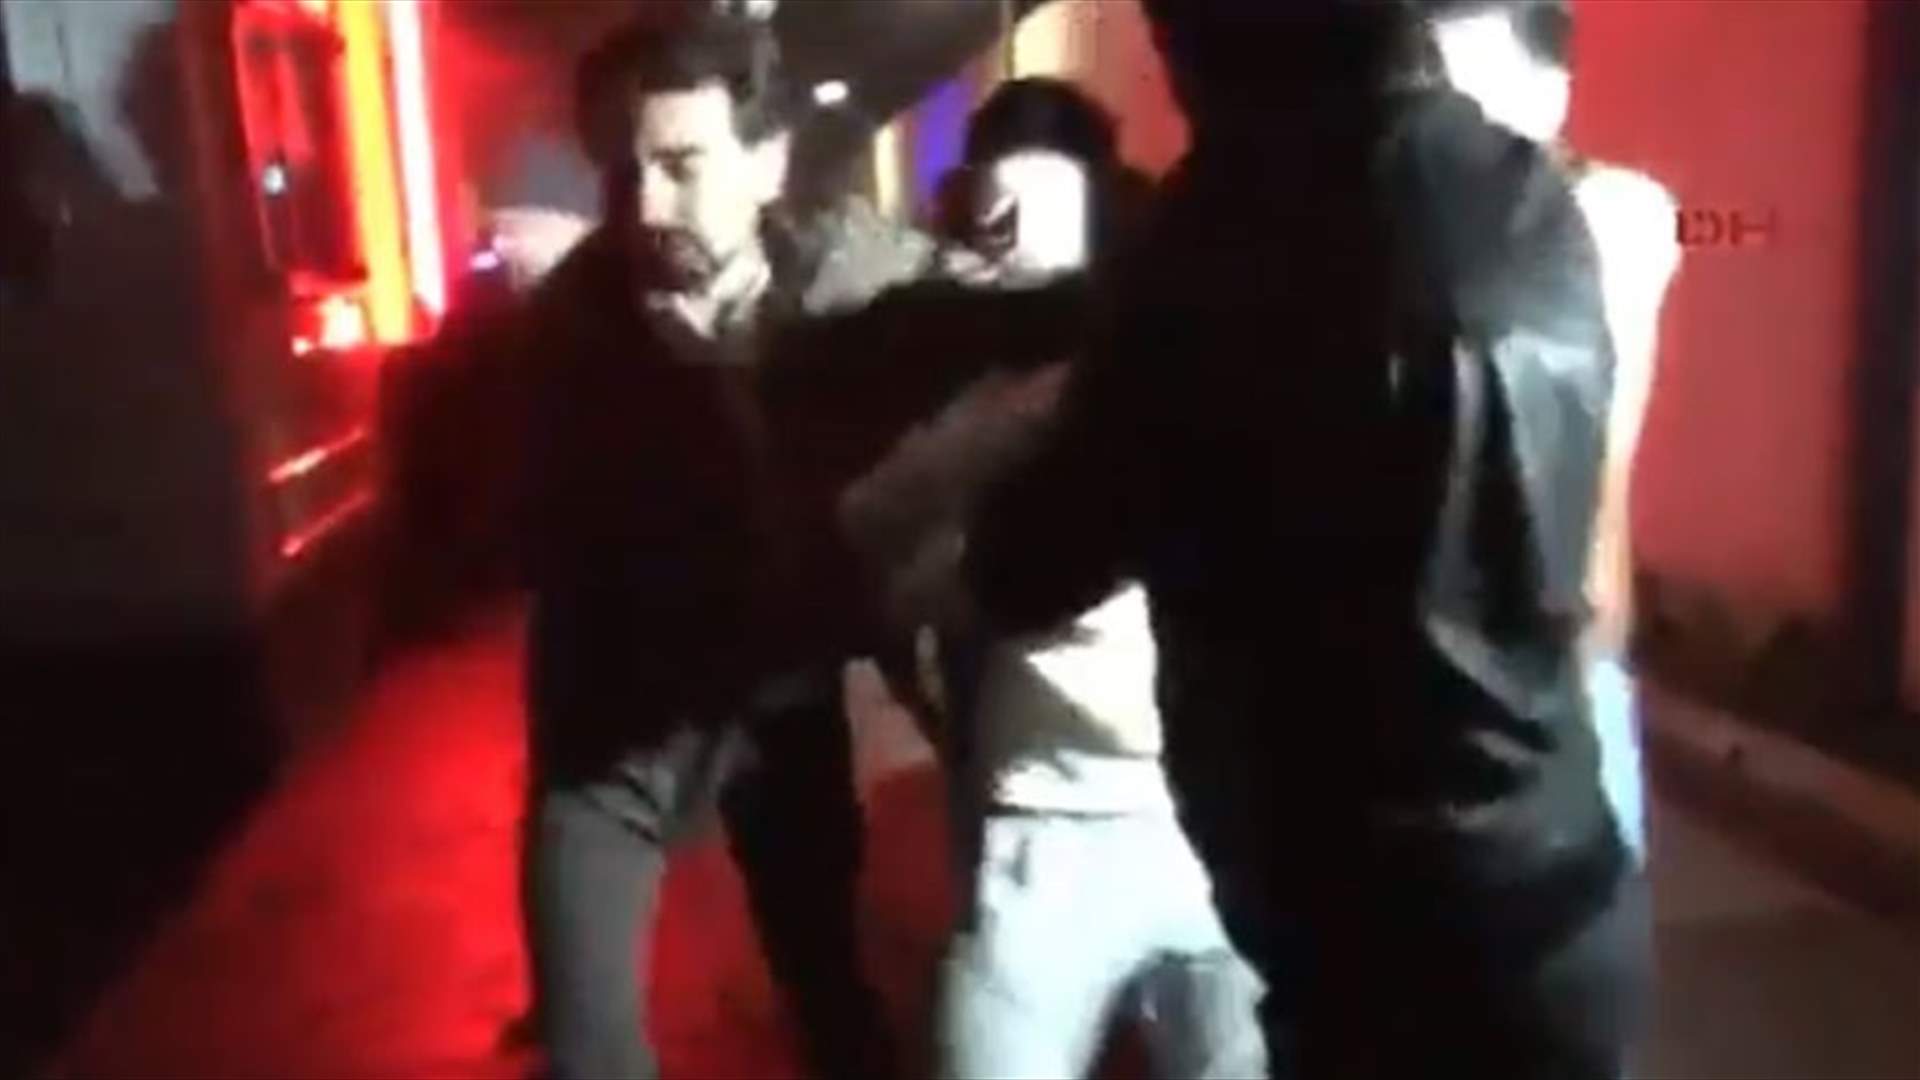 VIDEO: The moment Istanbul Reina nightclub attacker was arrested